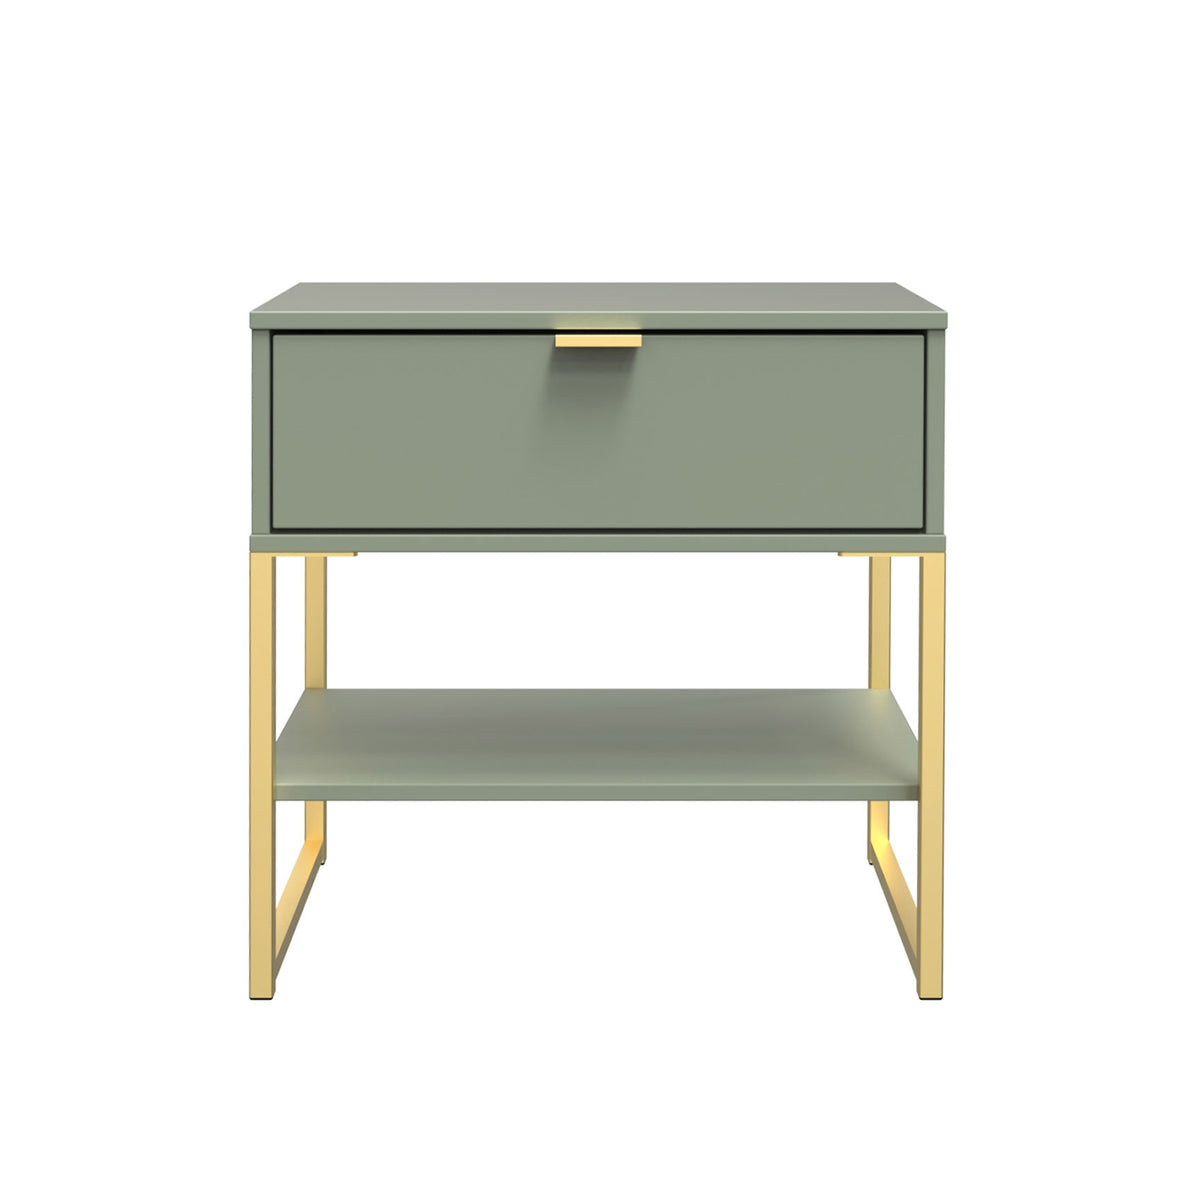 Hudson Olive 1 Drawer with Shelf Side Table with gold legs from Roseland